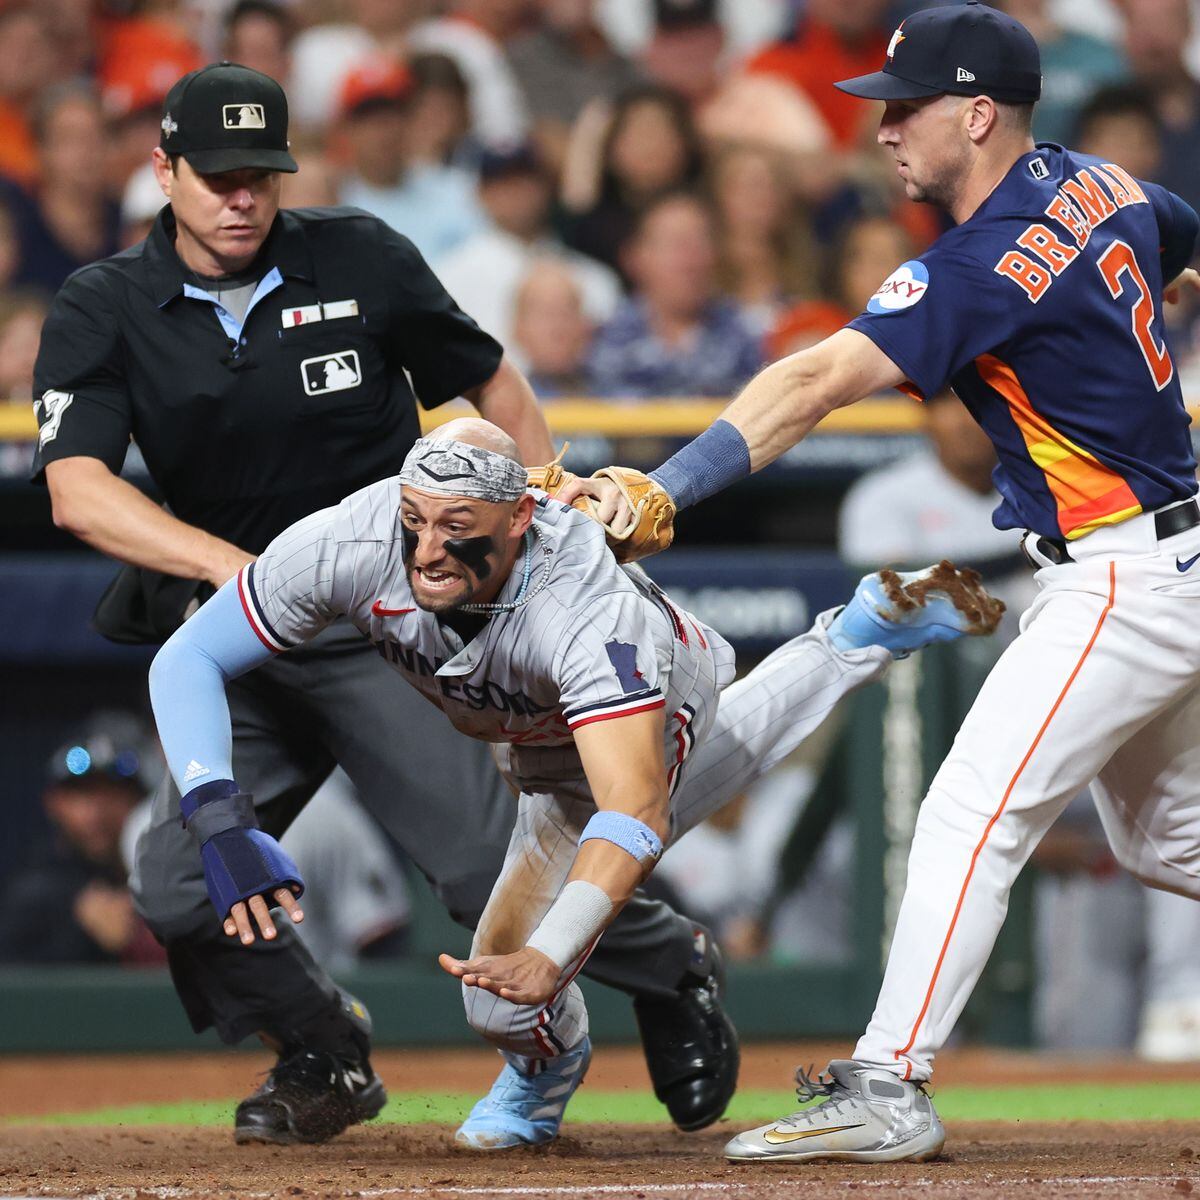 MLB shift rule change in 2023 aims to help hitters, but strong